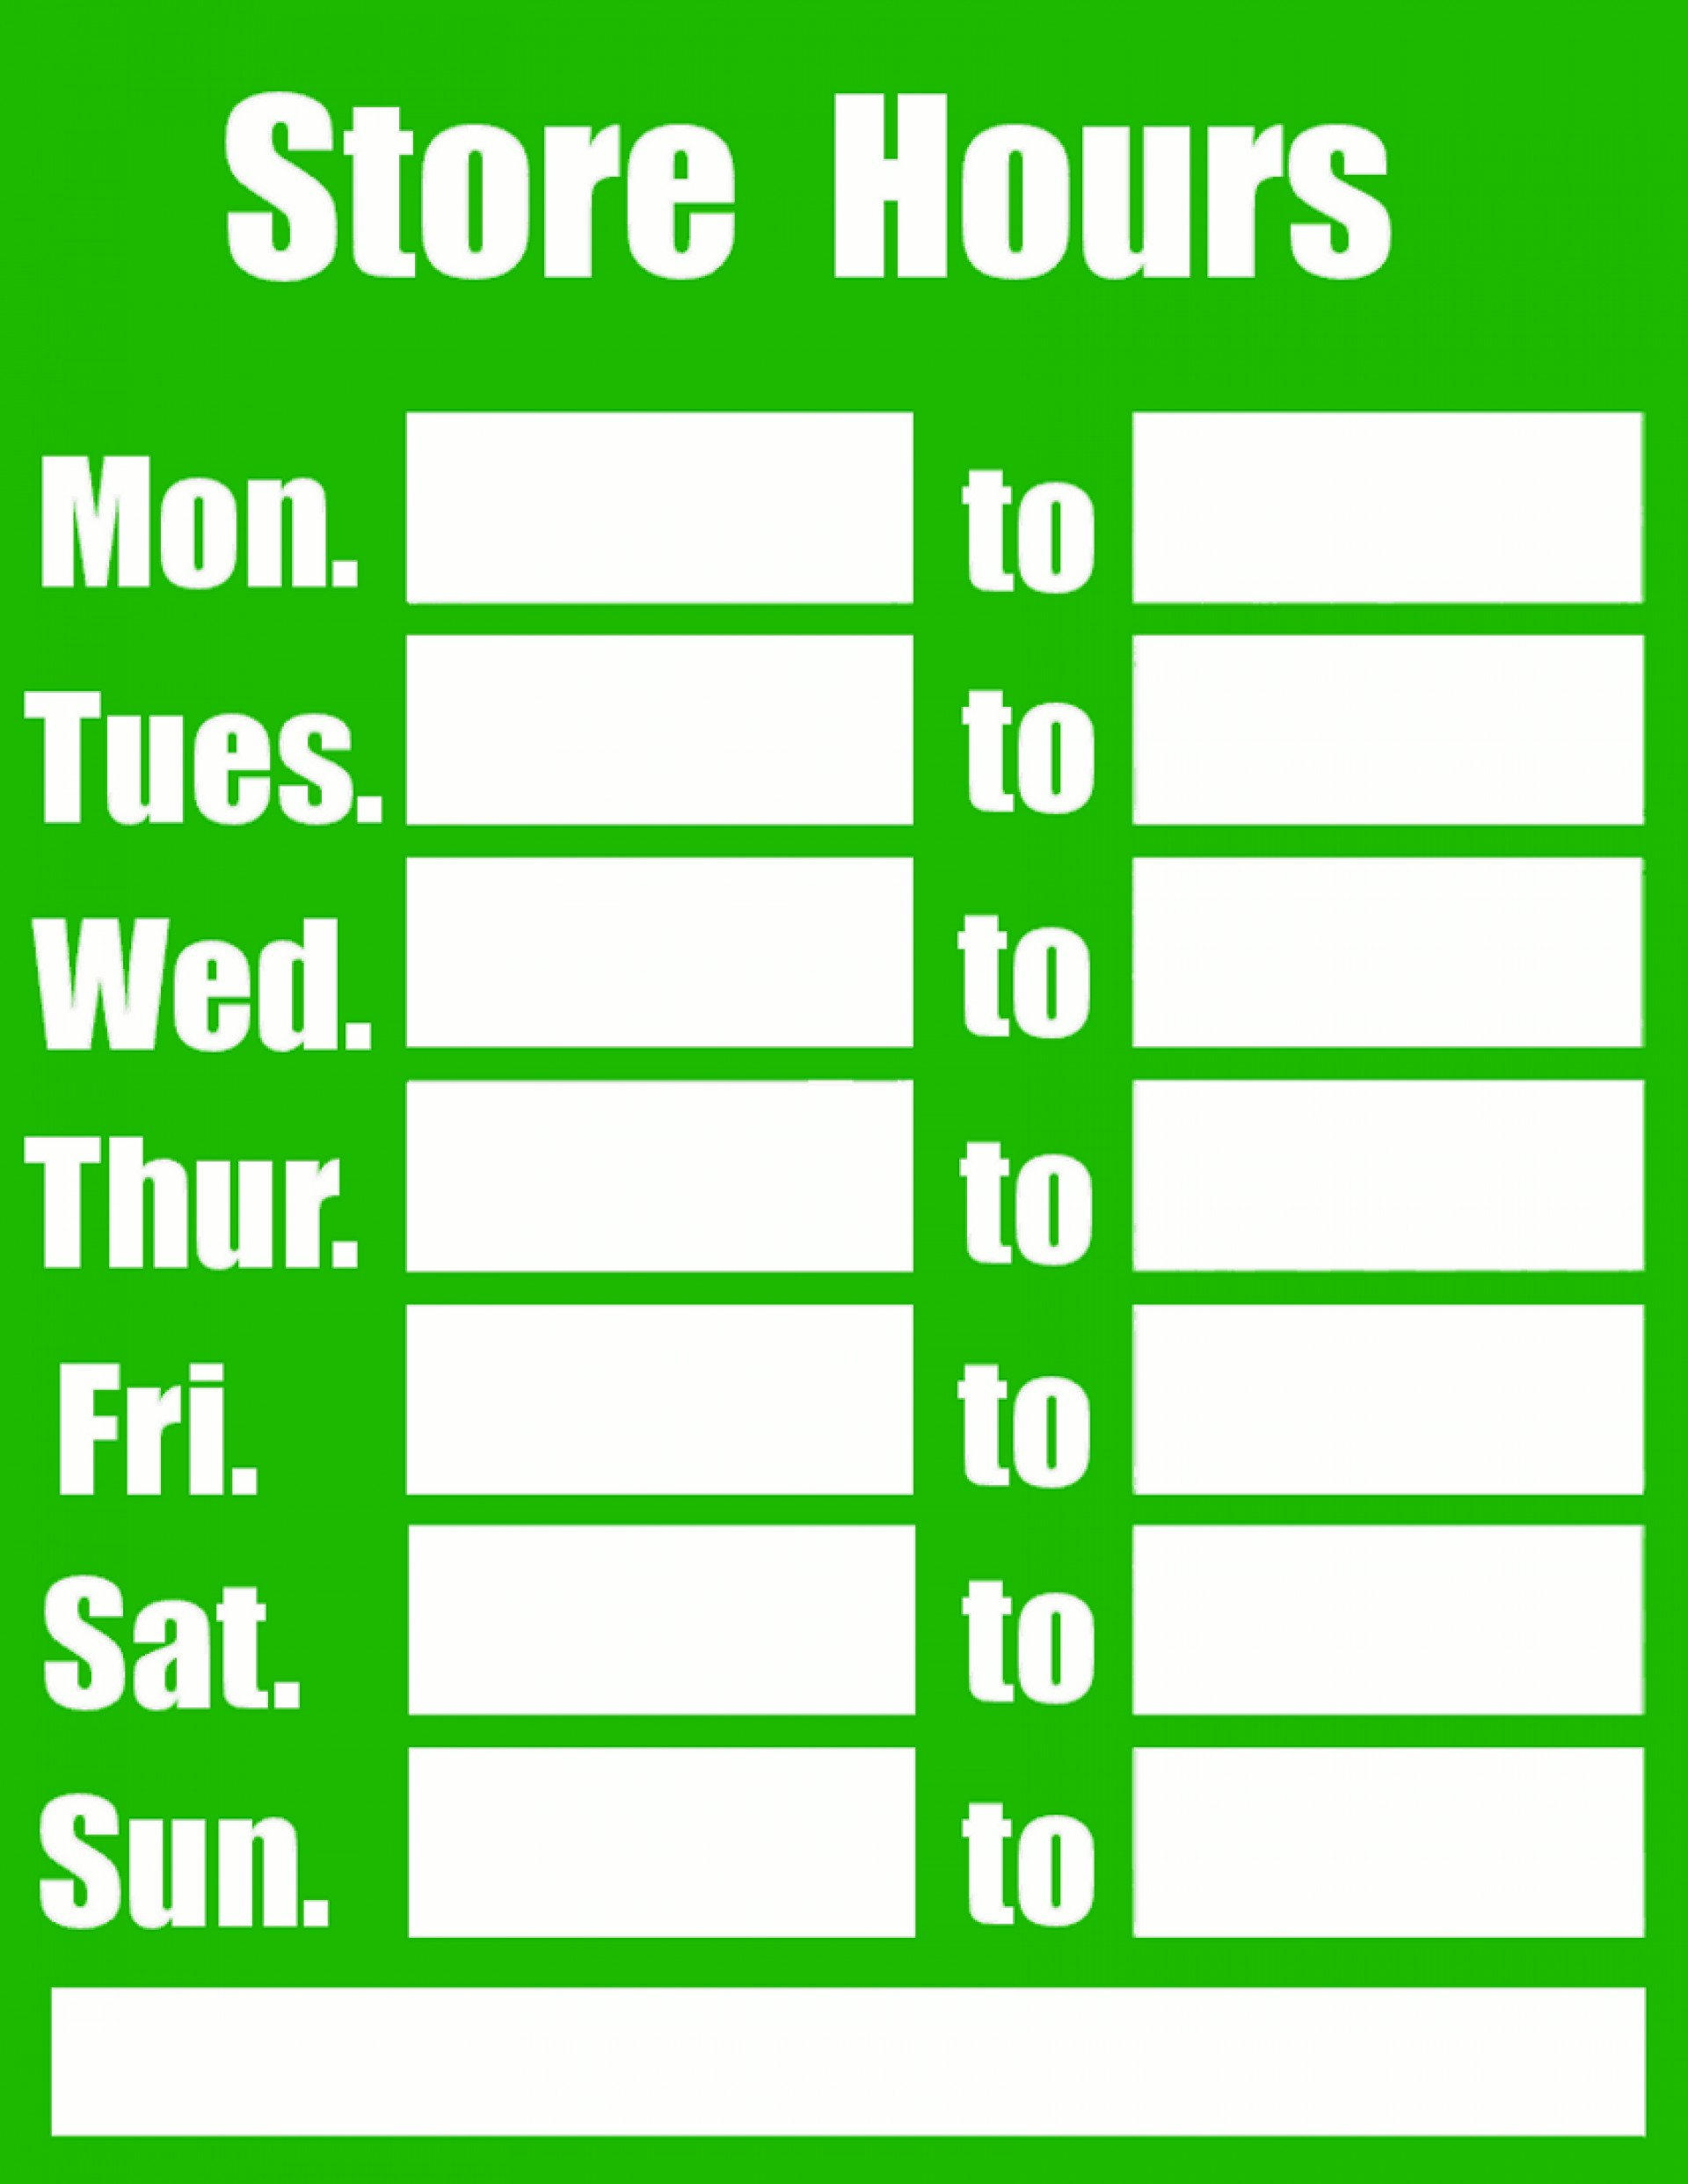 Free Printable Business Hours Sign